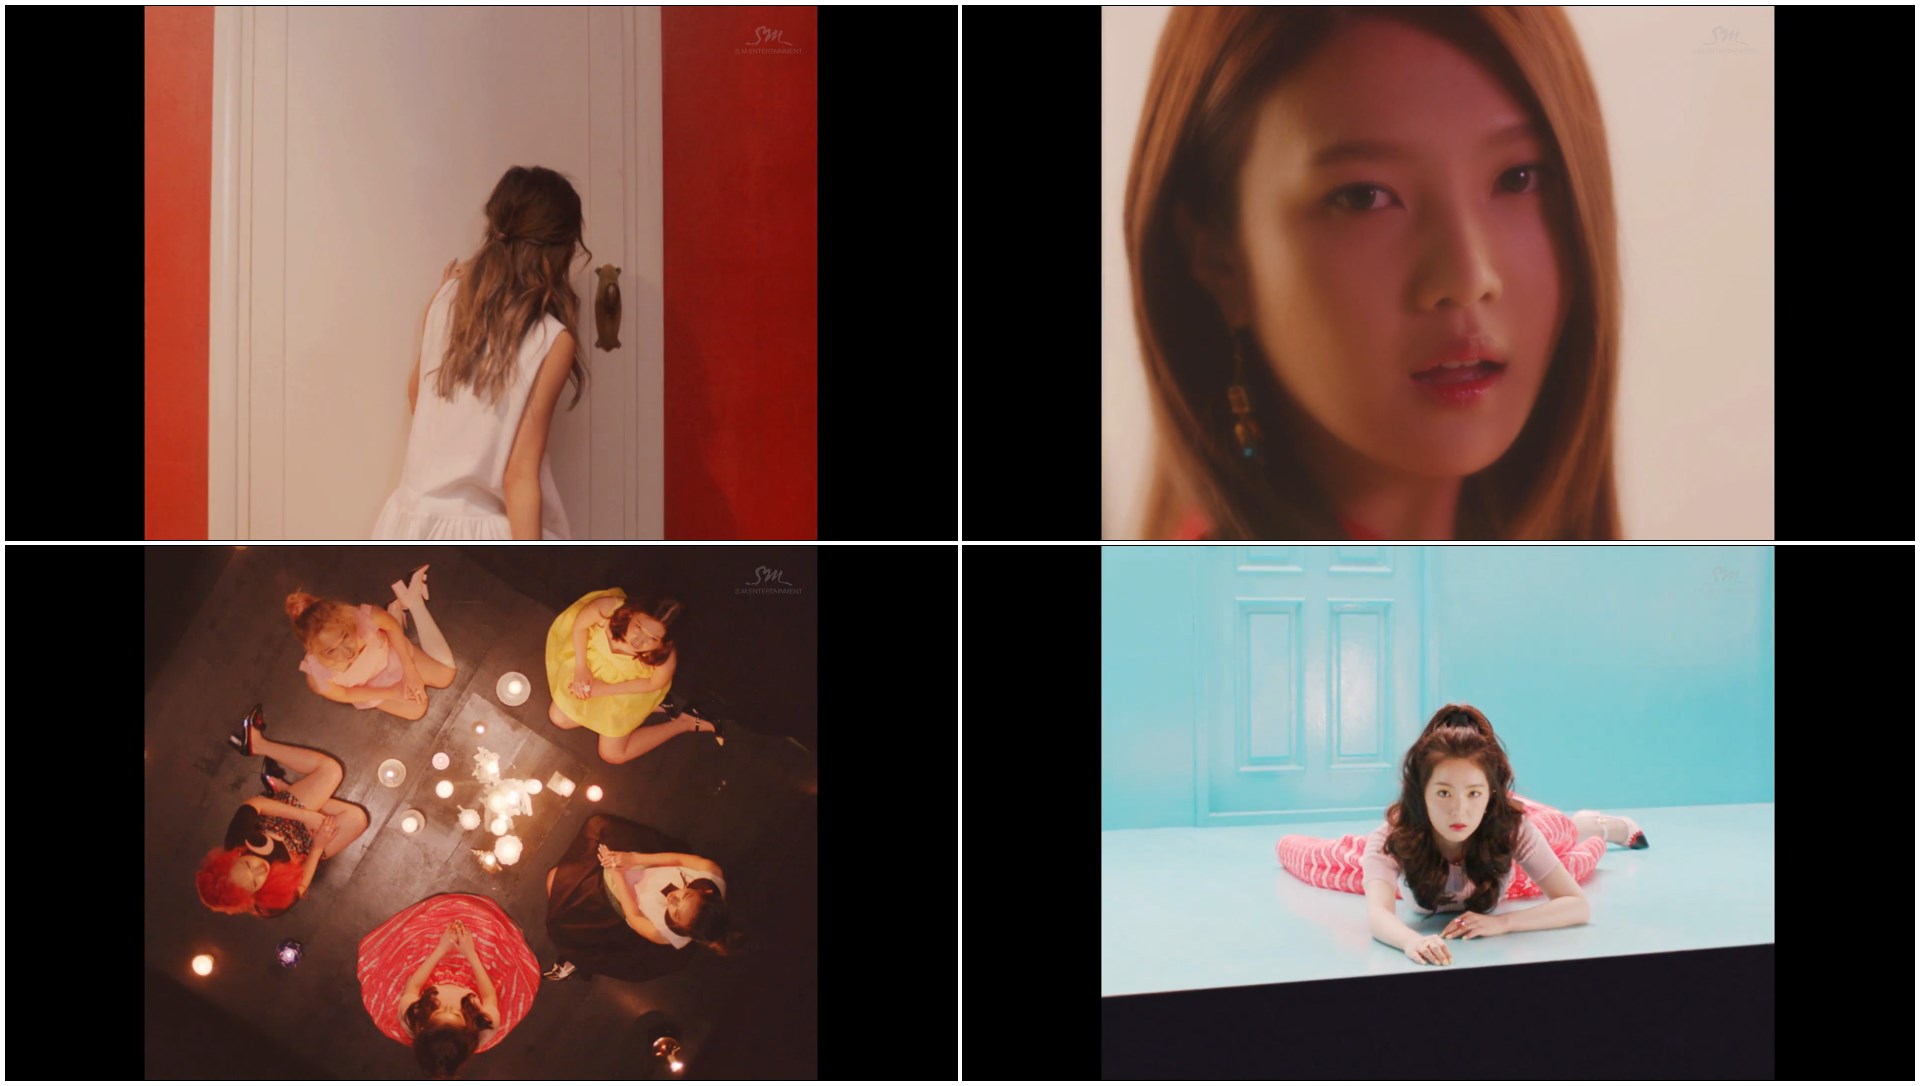 [MV] 레드벨벳(Red Velvet) - 7월 7일 (One Of These Nights)